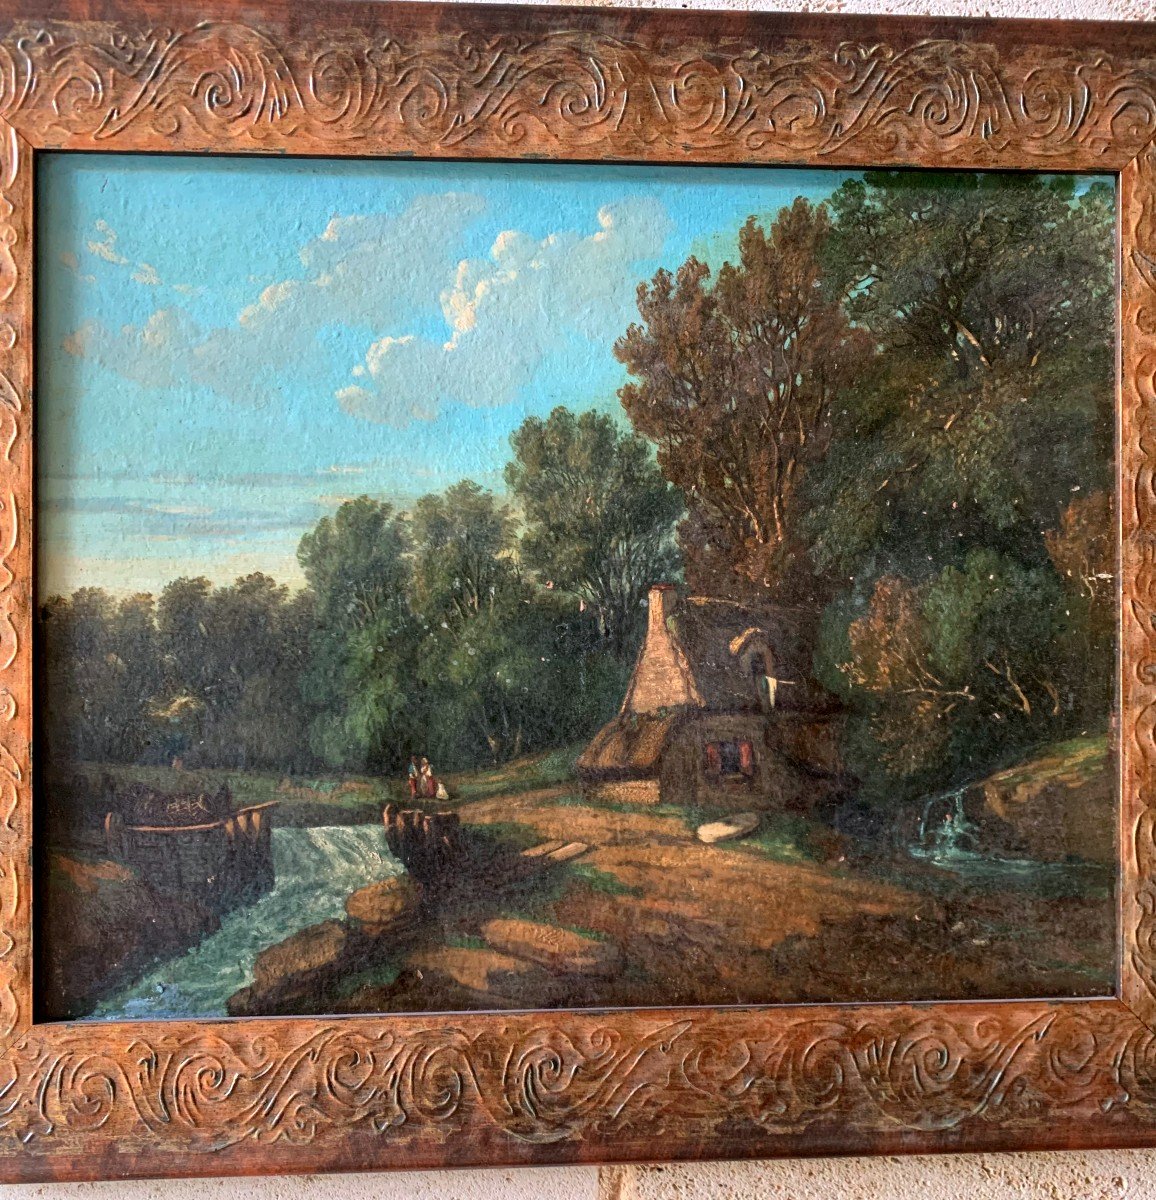 Hsp Signed By Marandon De Montyel And Dated 1848 “le Moulin”-photo-3